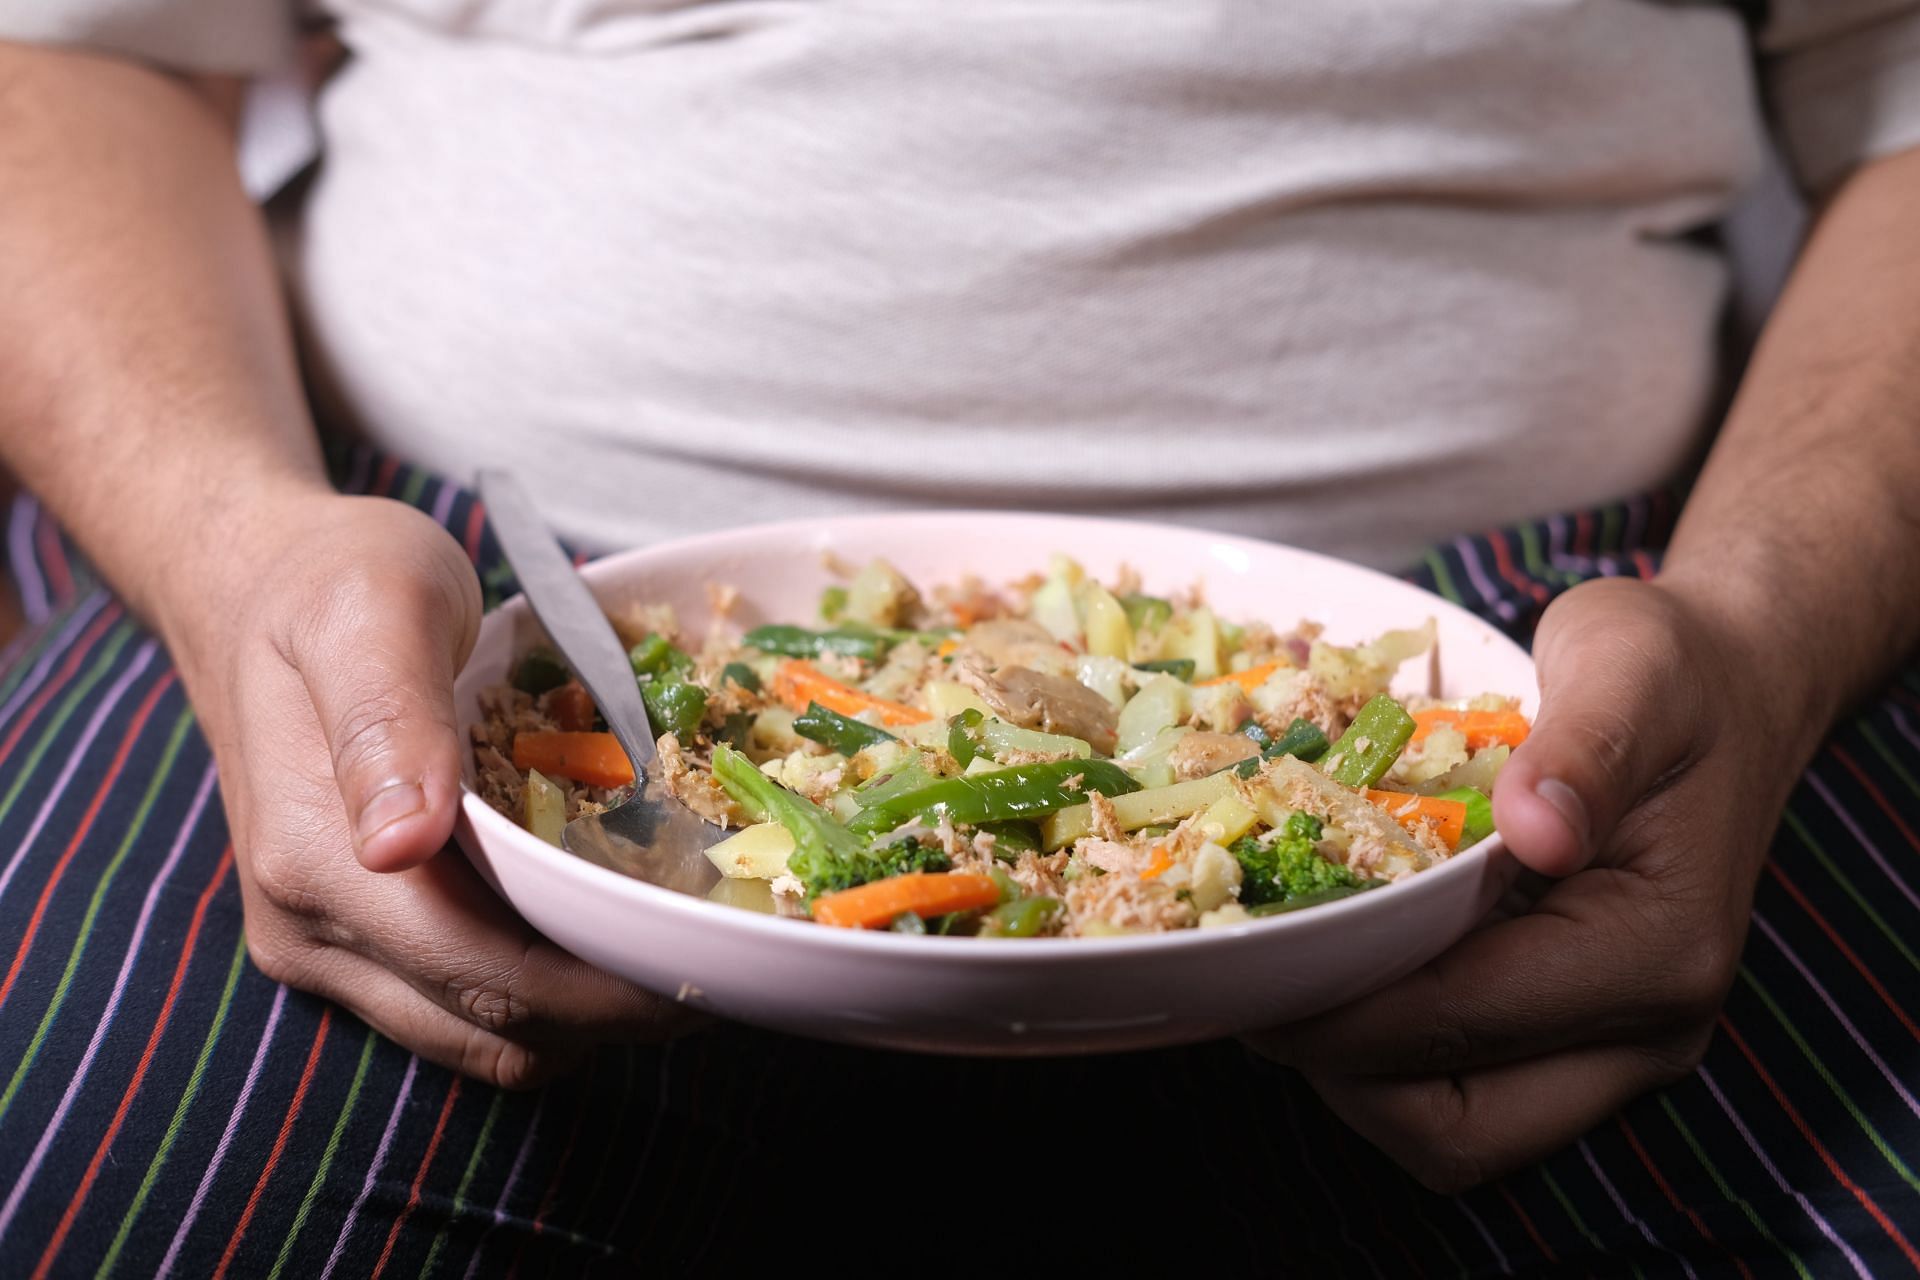 Obesity leads to bad health. (Image sourced via Pexels / Photo by towfiqu)